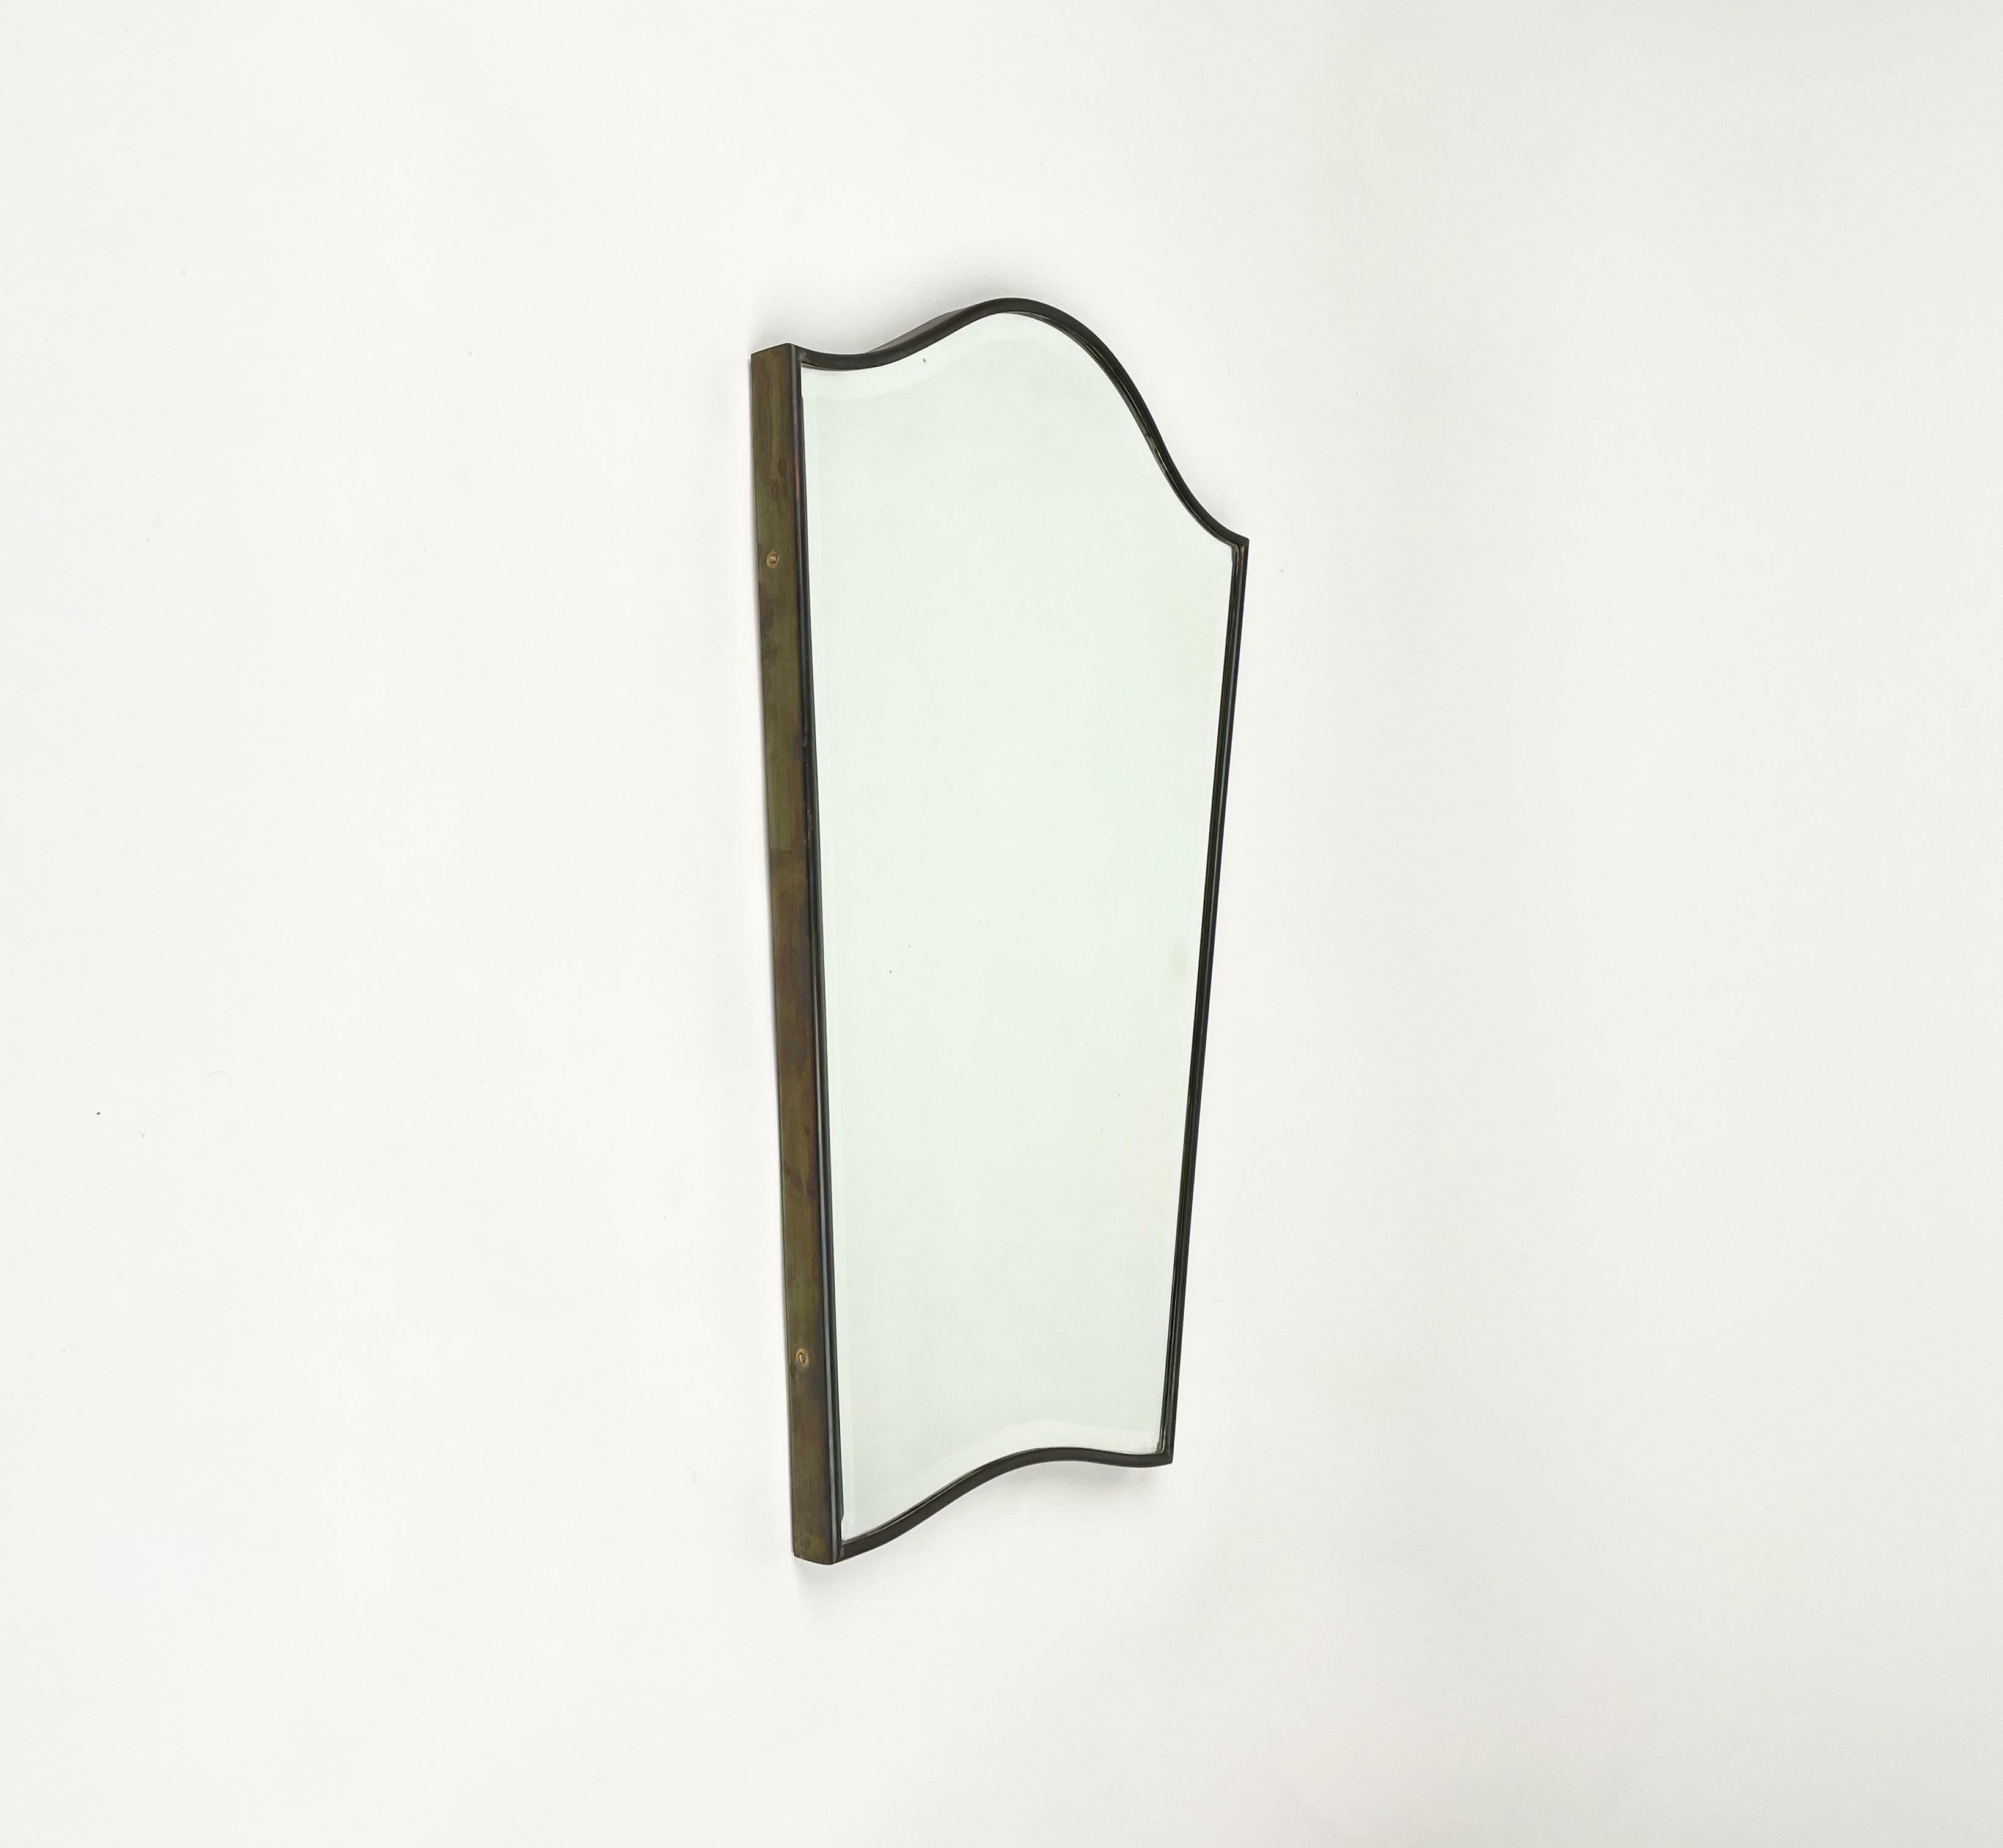 Wall mirror in the shape of a shield framed with brass in the style of the Italian designer Gio Ponti. 

Made in Italy in the 1950s.